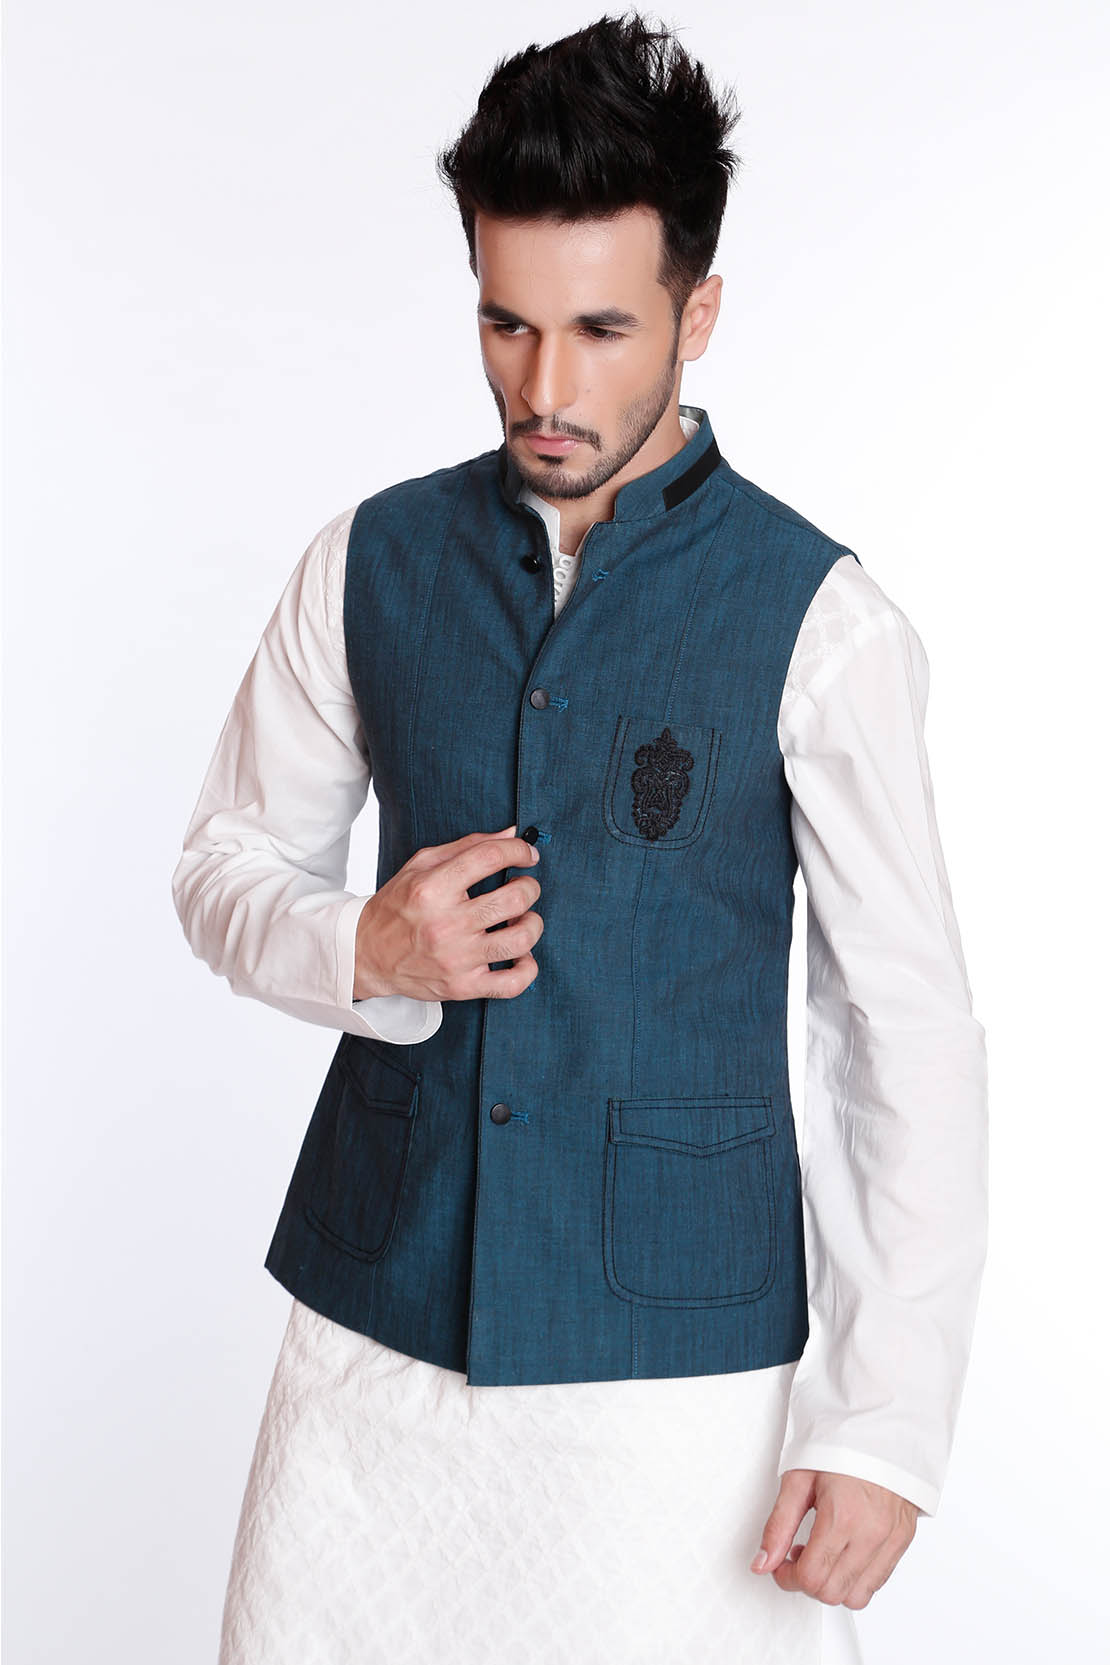 waistcoat-men-by-chinyere-8